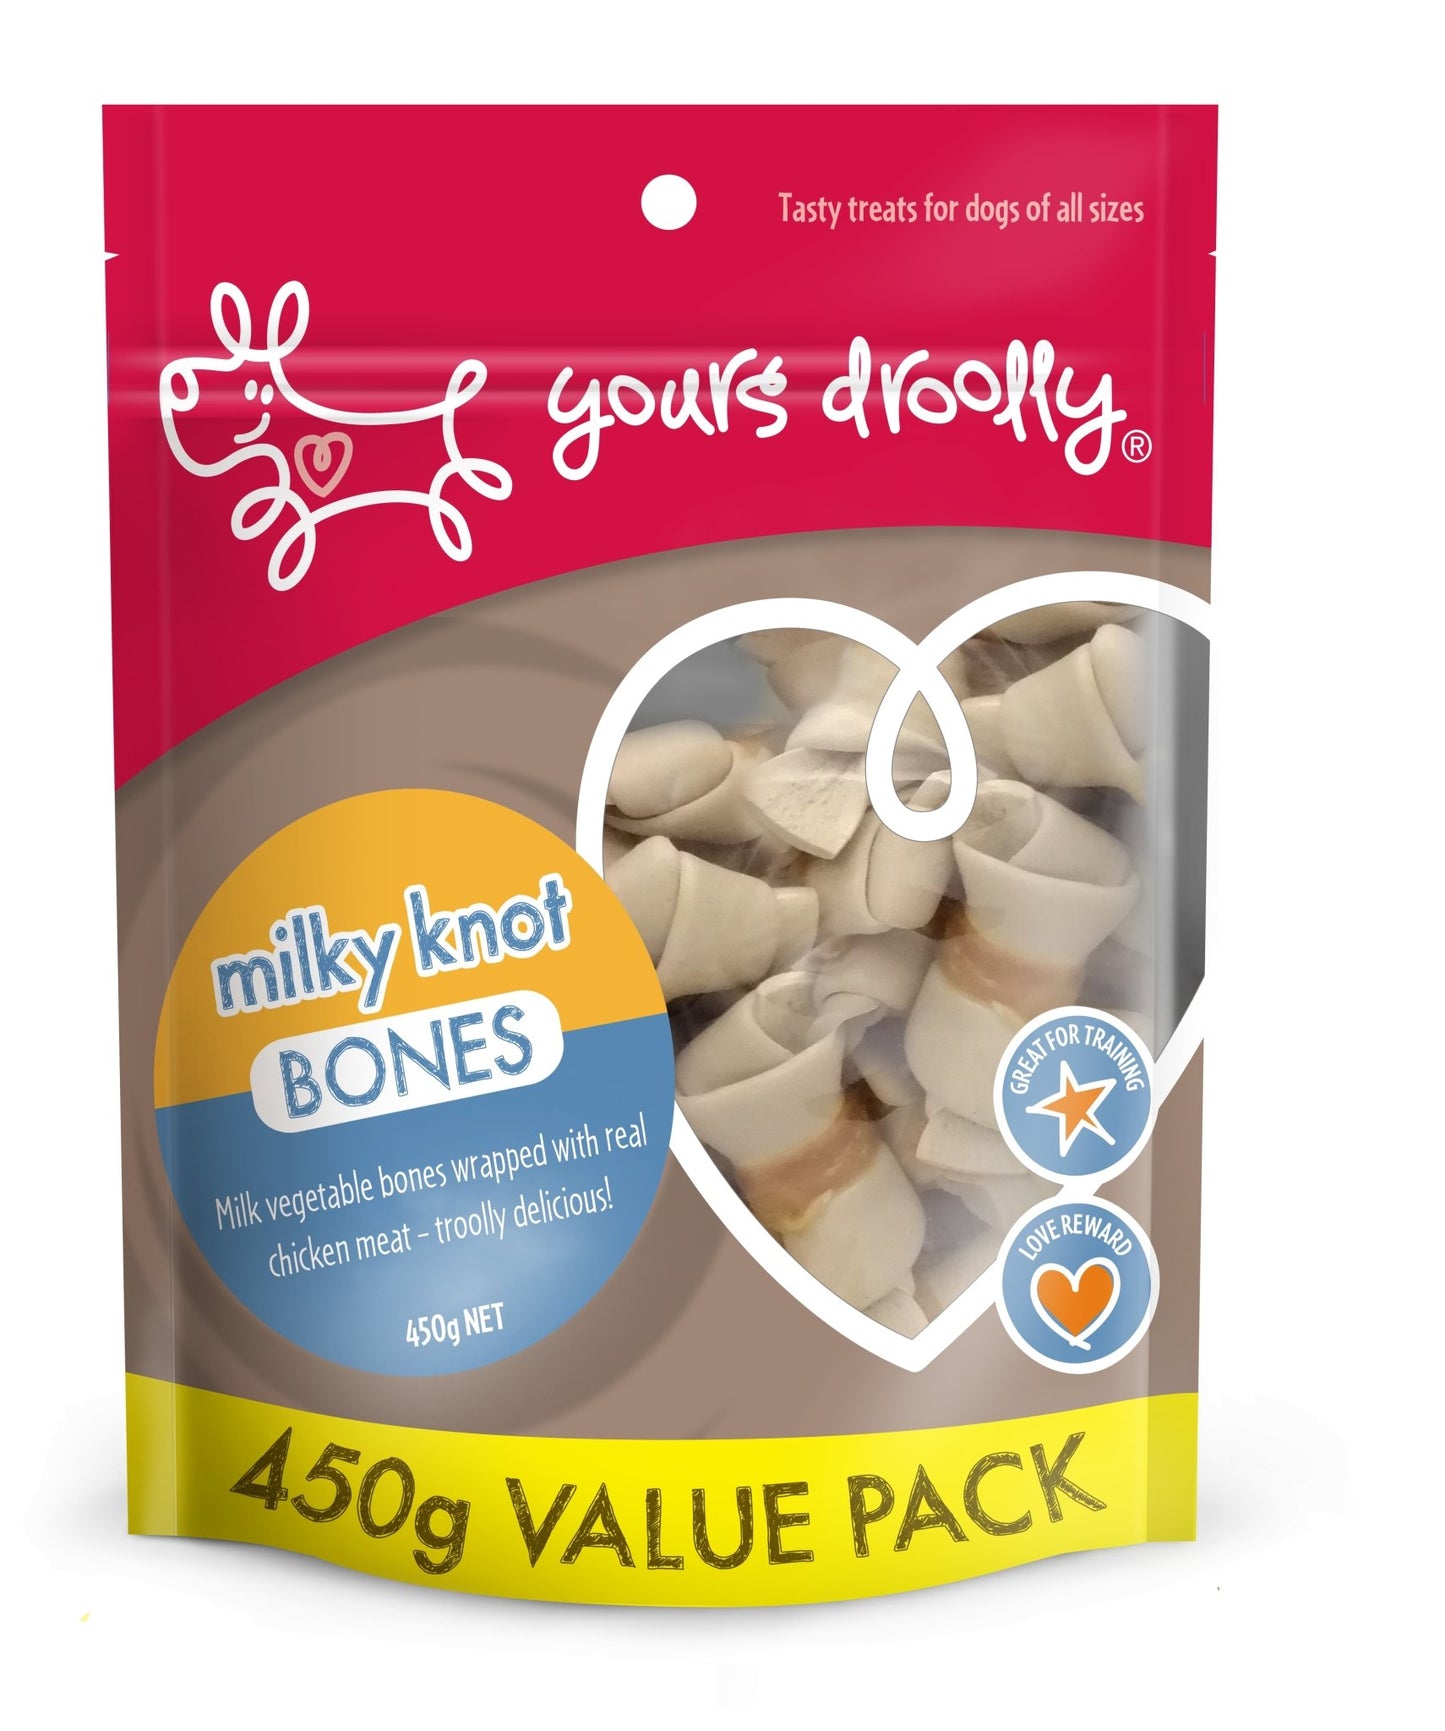 Yours Droolly Milky Knot Bones 450g - Woonona Petfood & Produce